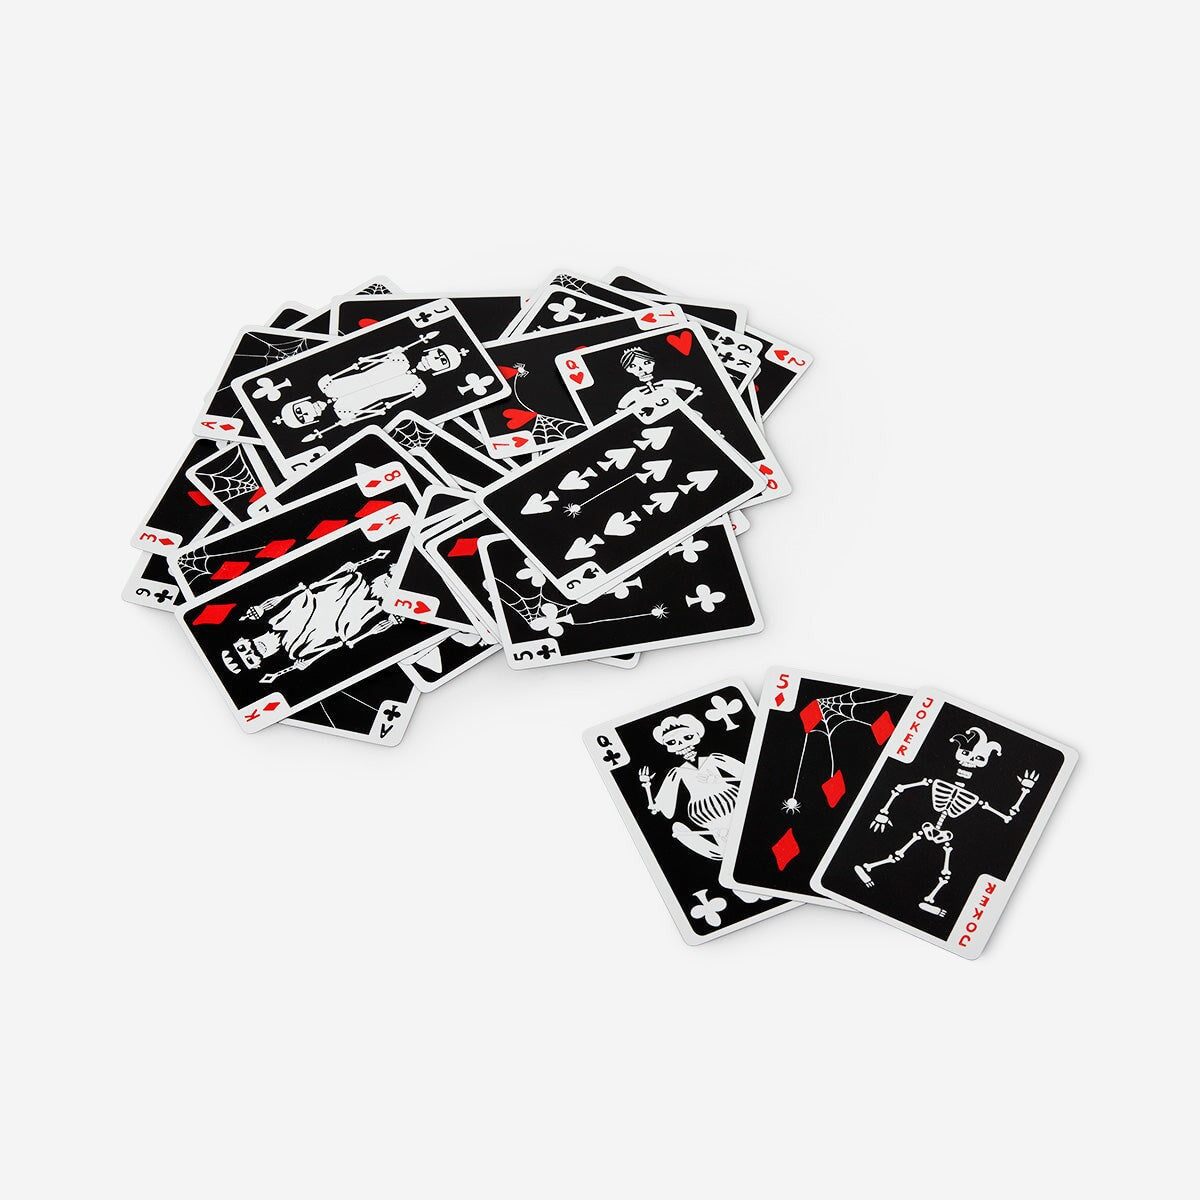 Playing cards Game Flying Tiger Copenhagen 